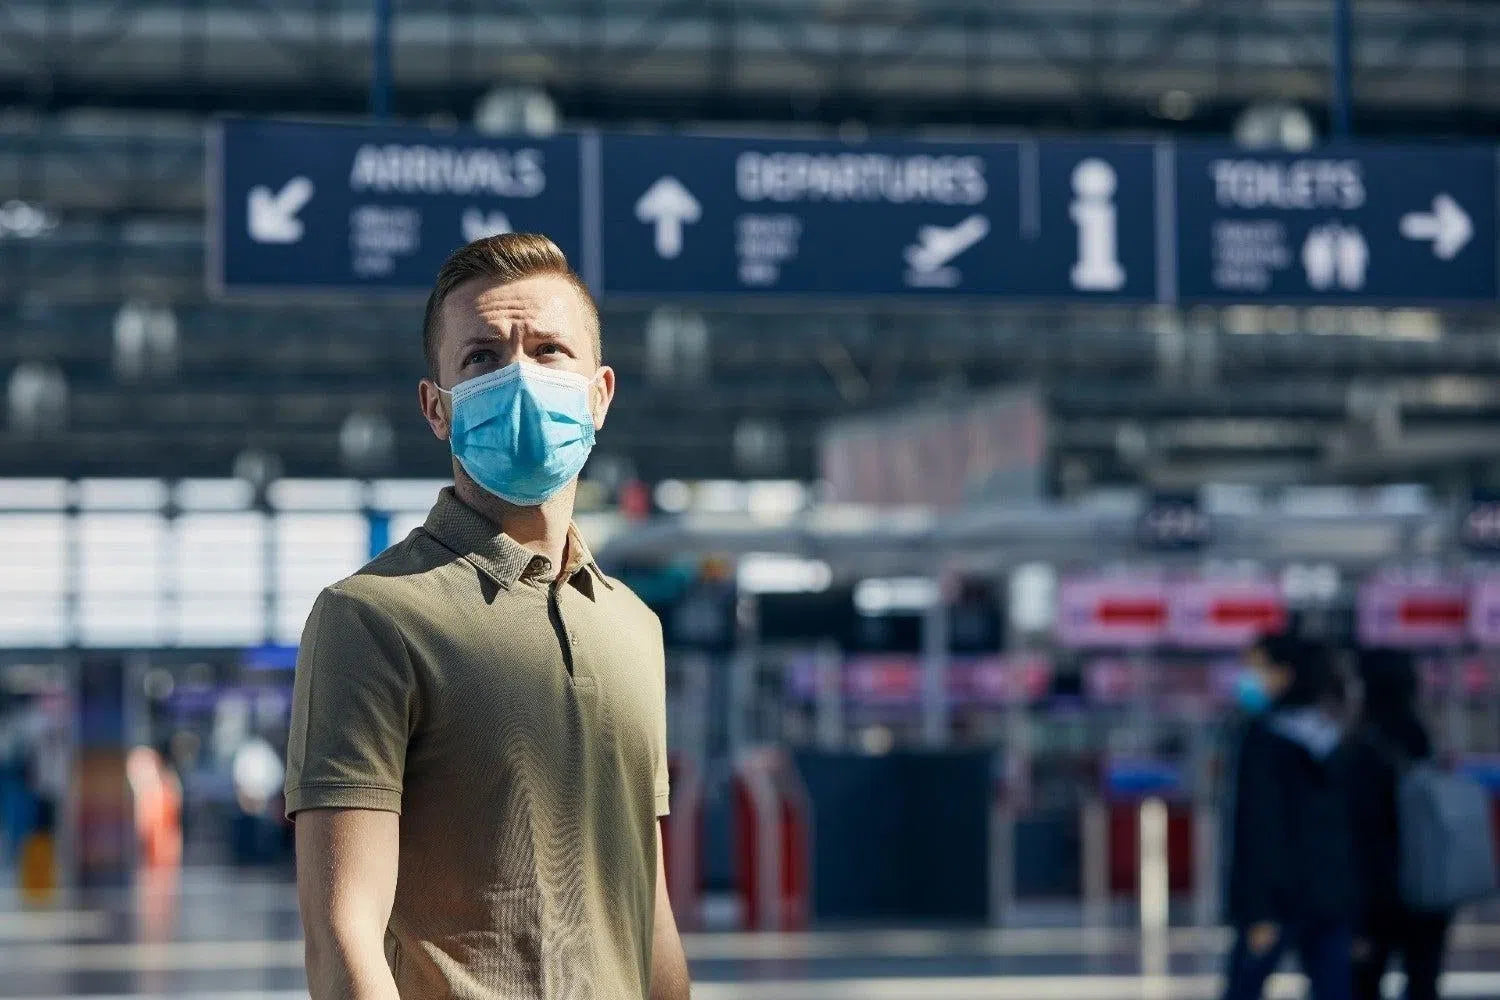 Top 7 Masks To Stay Safe During Pandemic